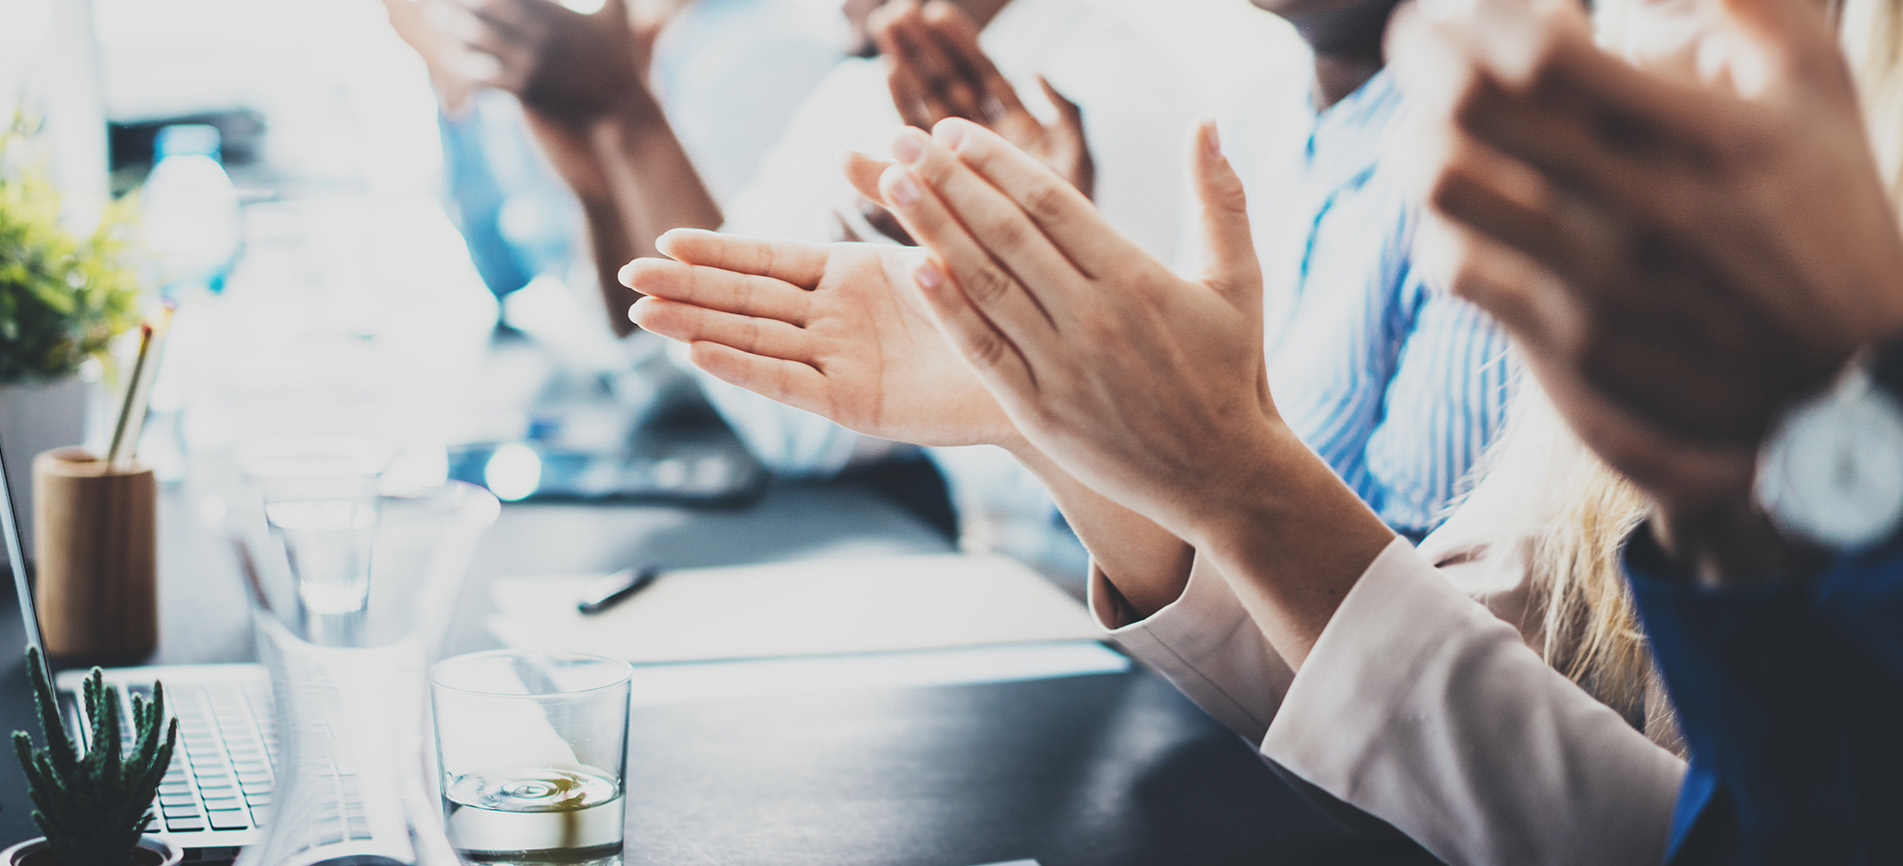 Various sets of hands clapping at a meeting table.